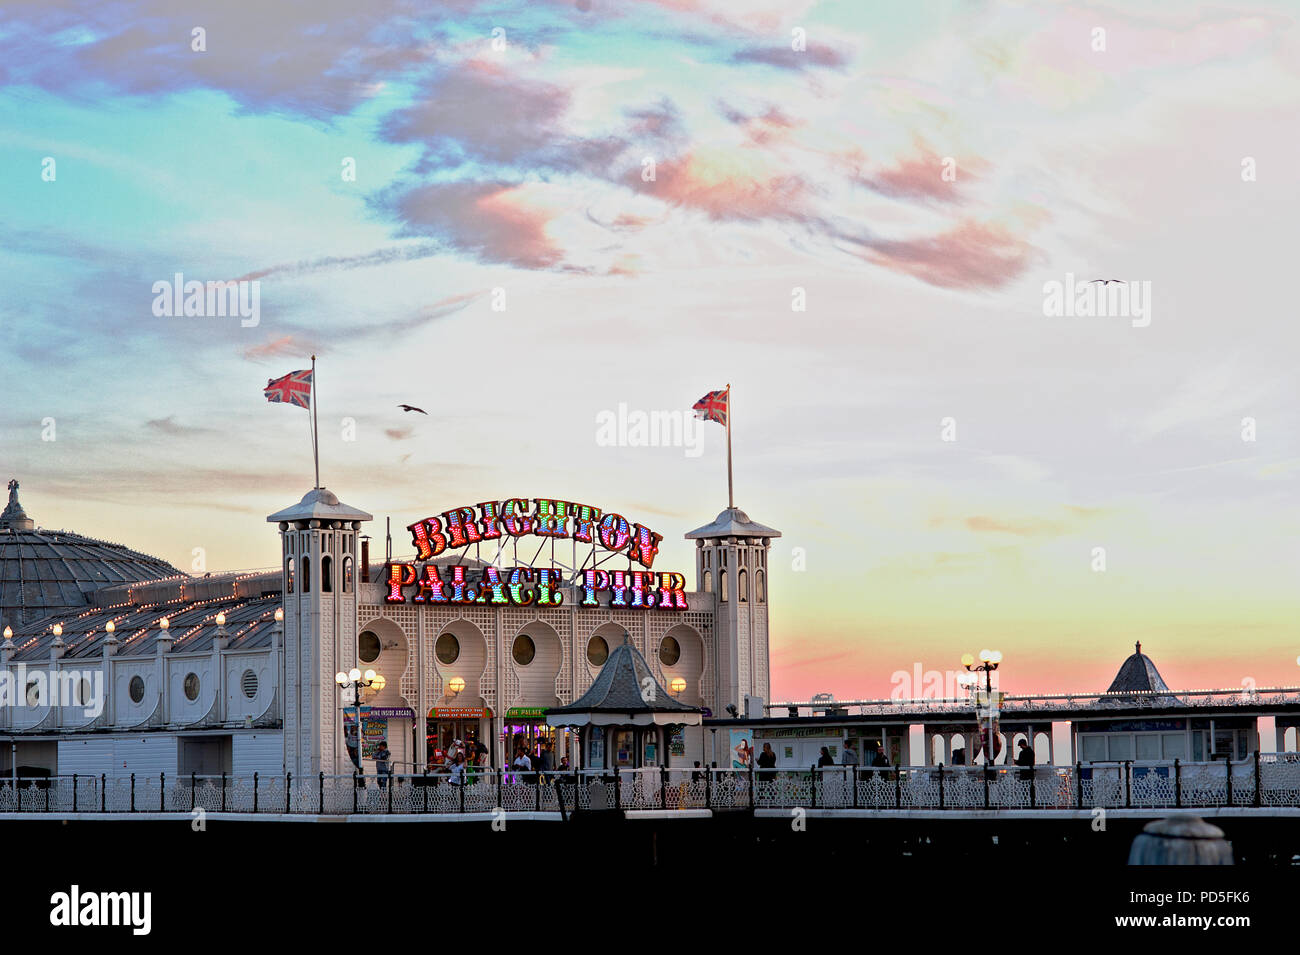 The famous Brighton Palace Pier on England's south coast changed its name in 2018 to Brighton Palace Pier, a combination of its two previous names. Stock Photo